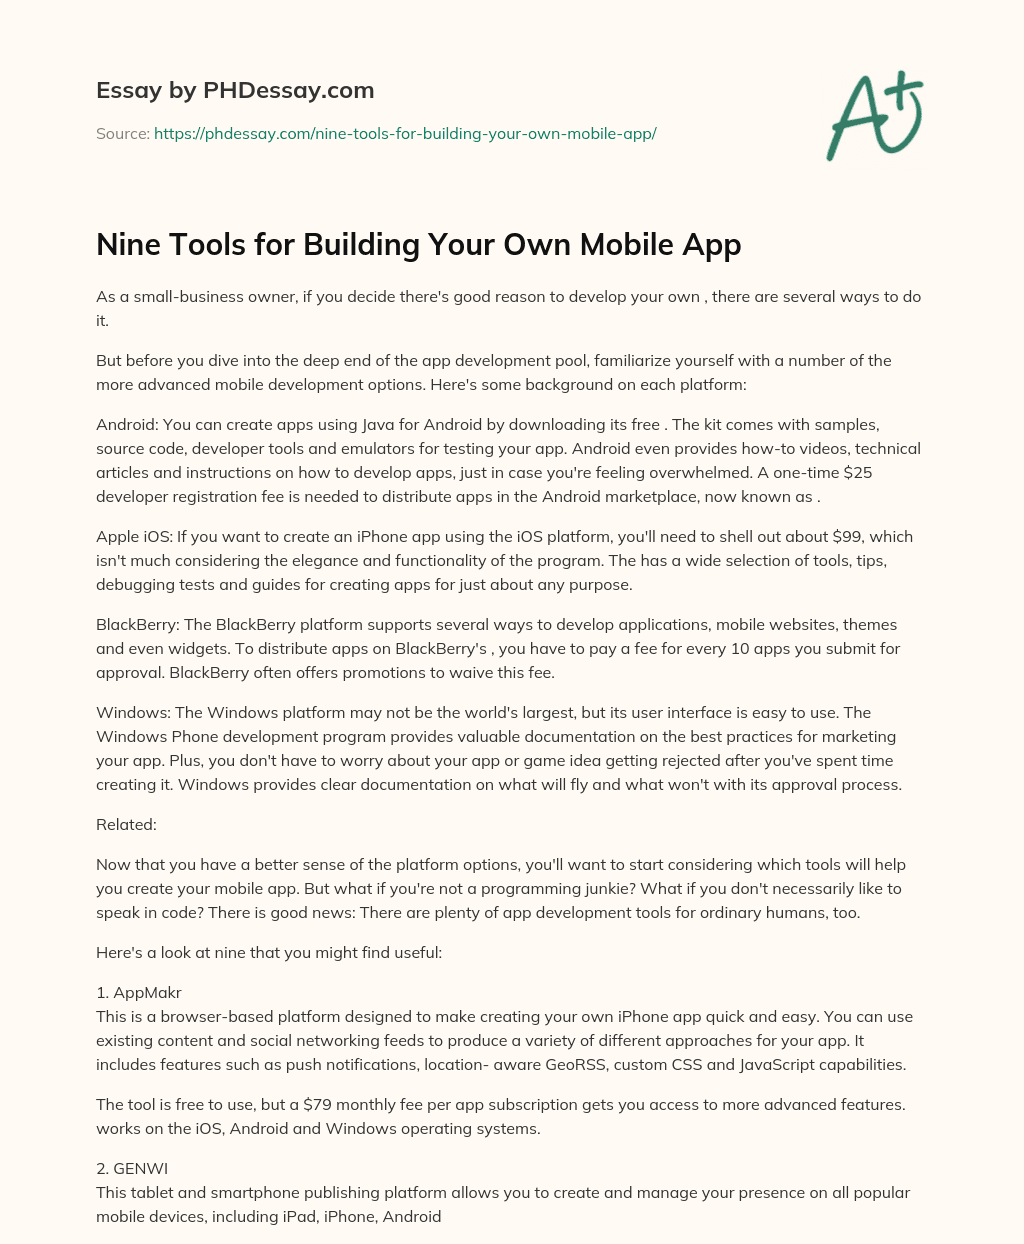 Nine Tools for Building Your Own Mobile App essay